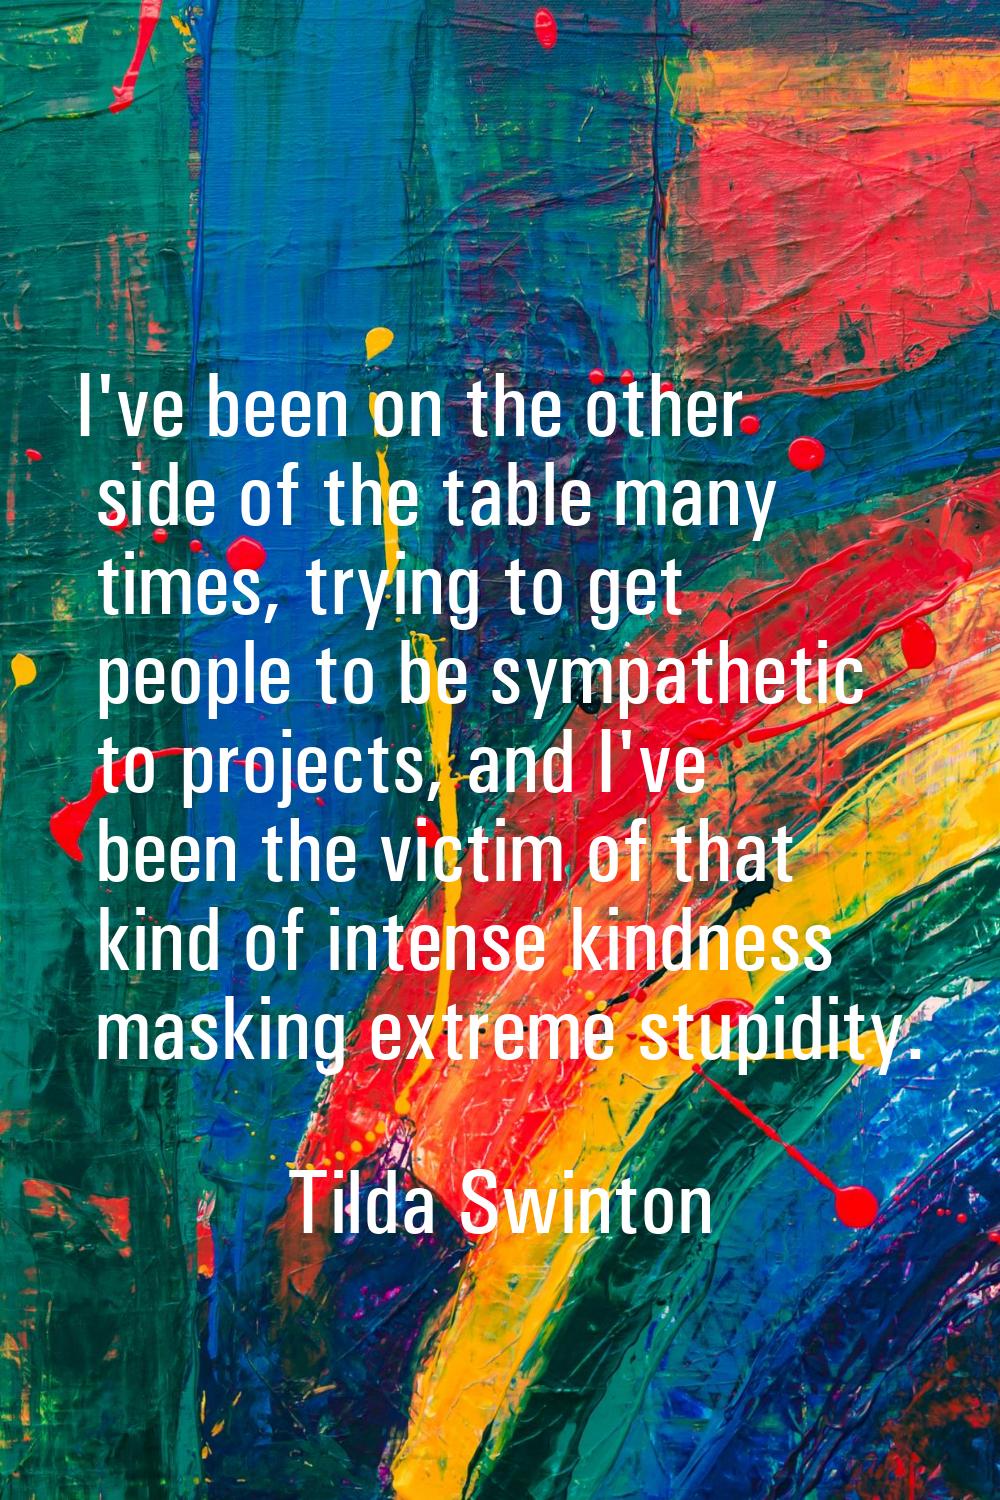 I've been on the other side of the table many times, trying to get people to be sympathetic to proj